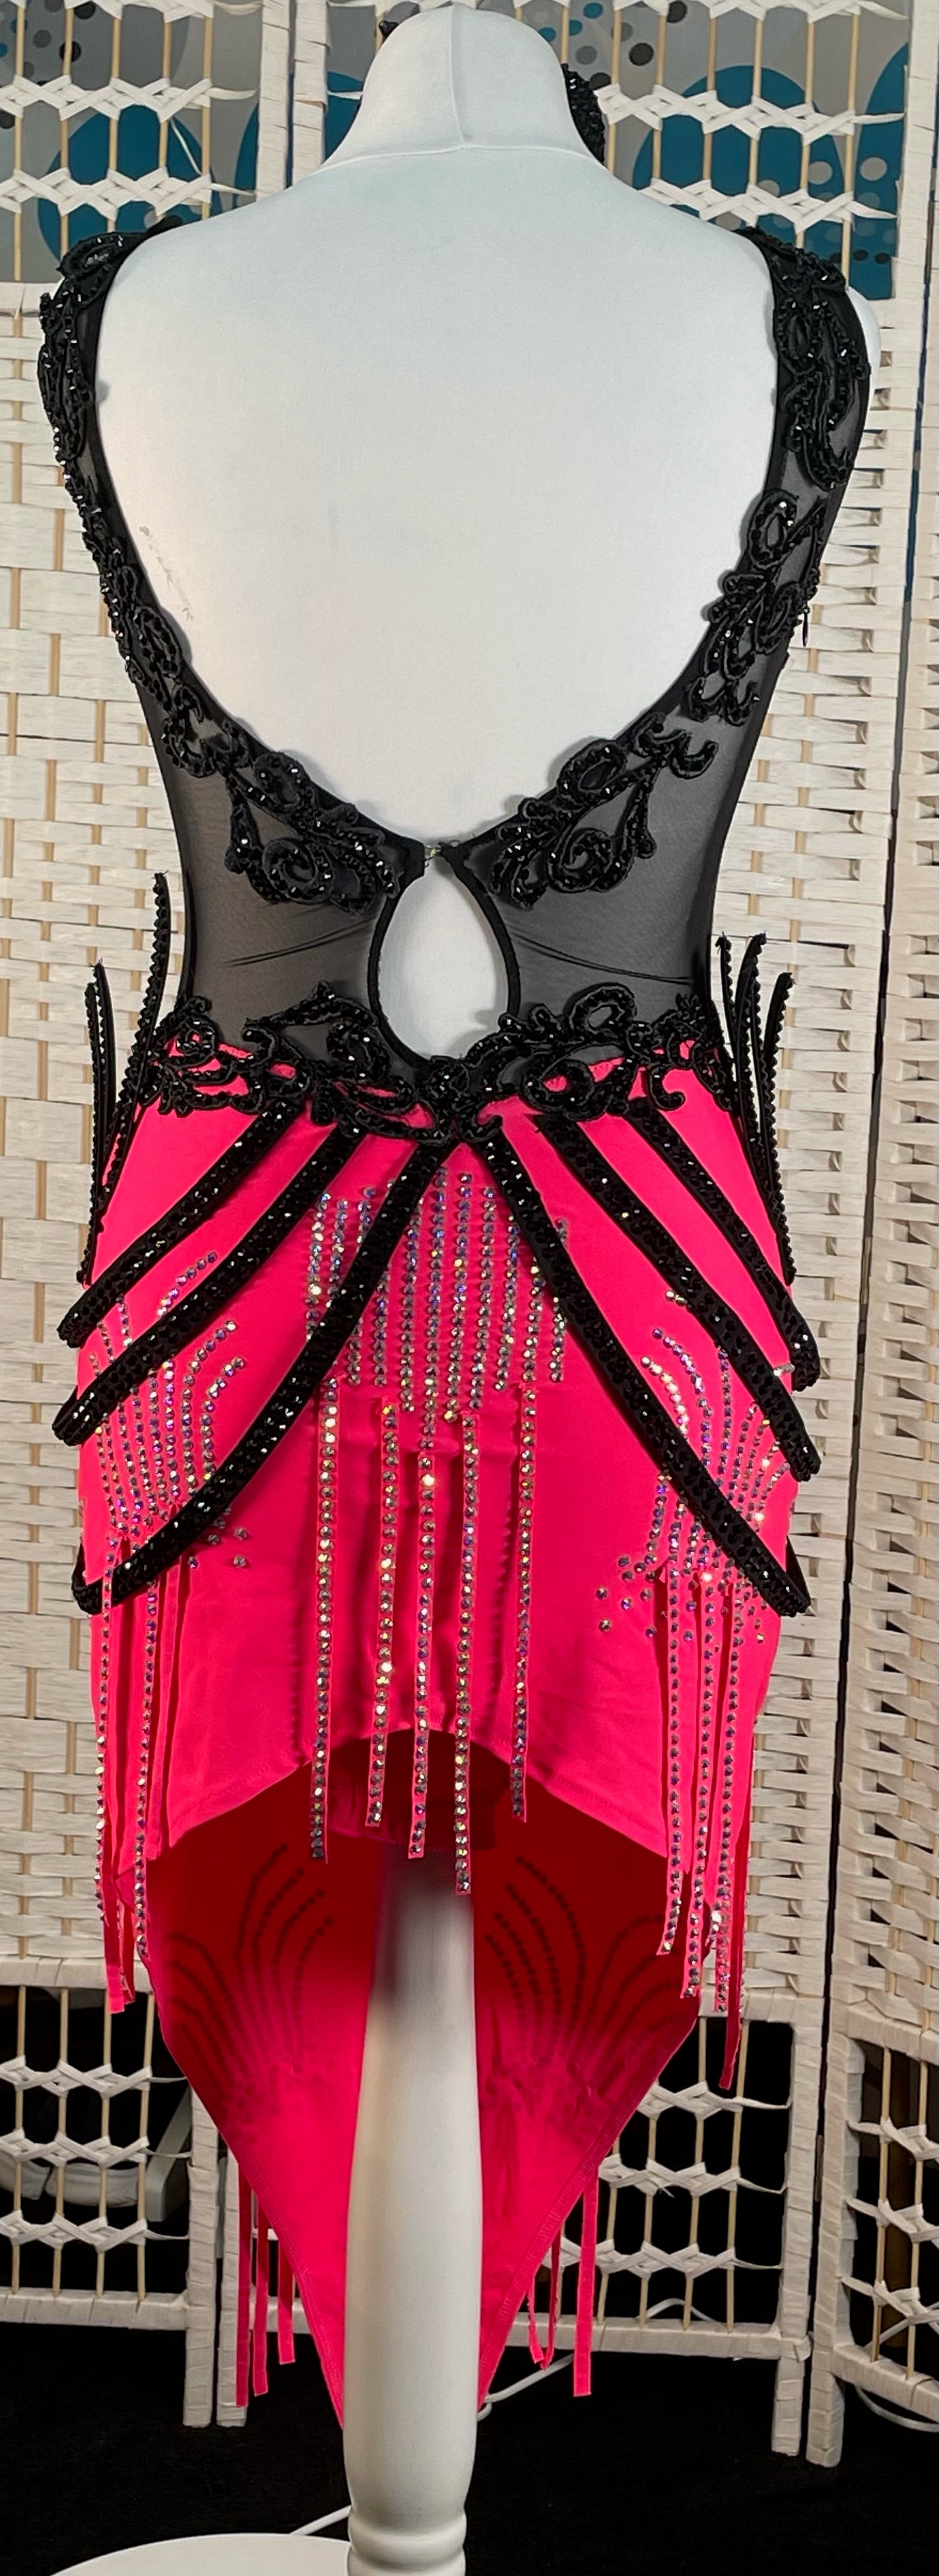 084 Black & Electric Pink Latin Dress. Black mesh bodice decorated with black appliqué & jet stones. Stoned material hip straps. Skirt decorated in AB